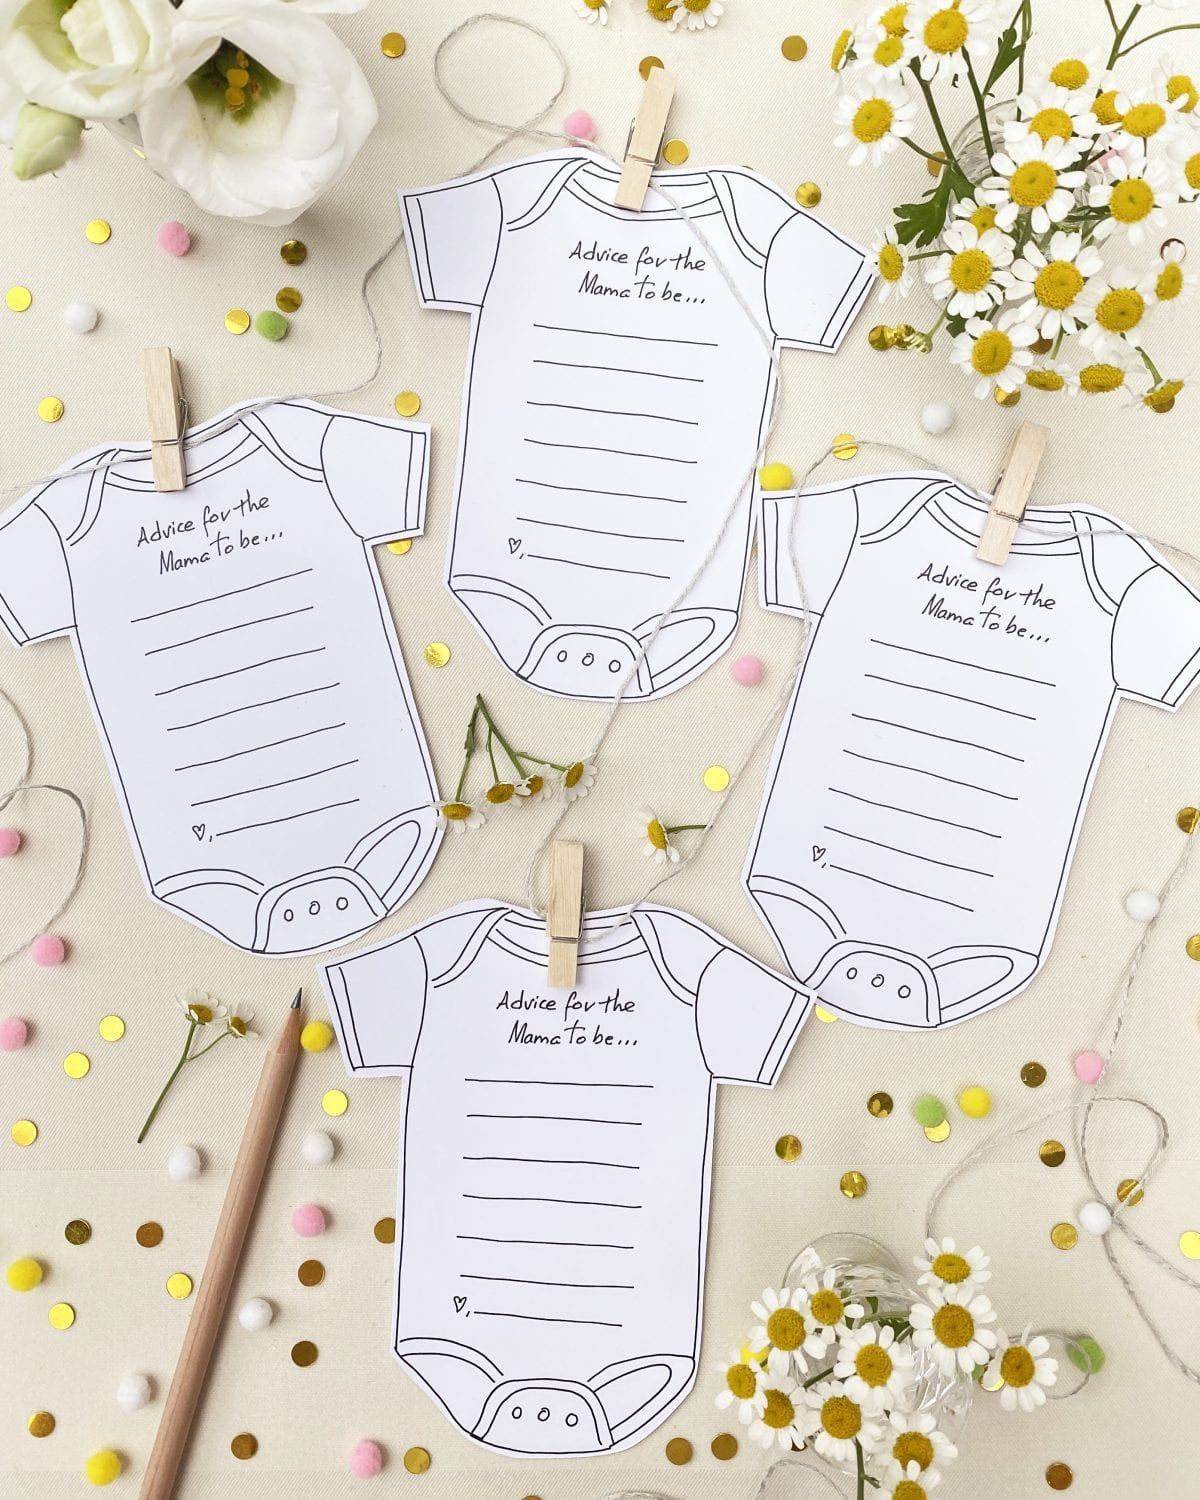 Baby Advice Card - Free Printable Advice Cards For Parents To Be